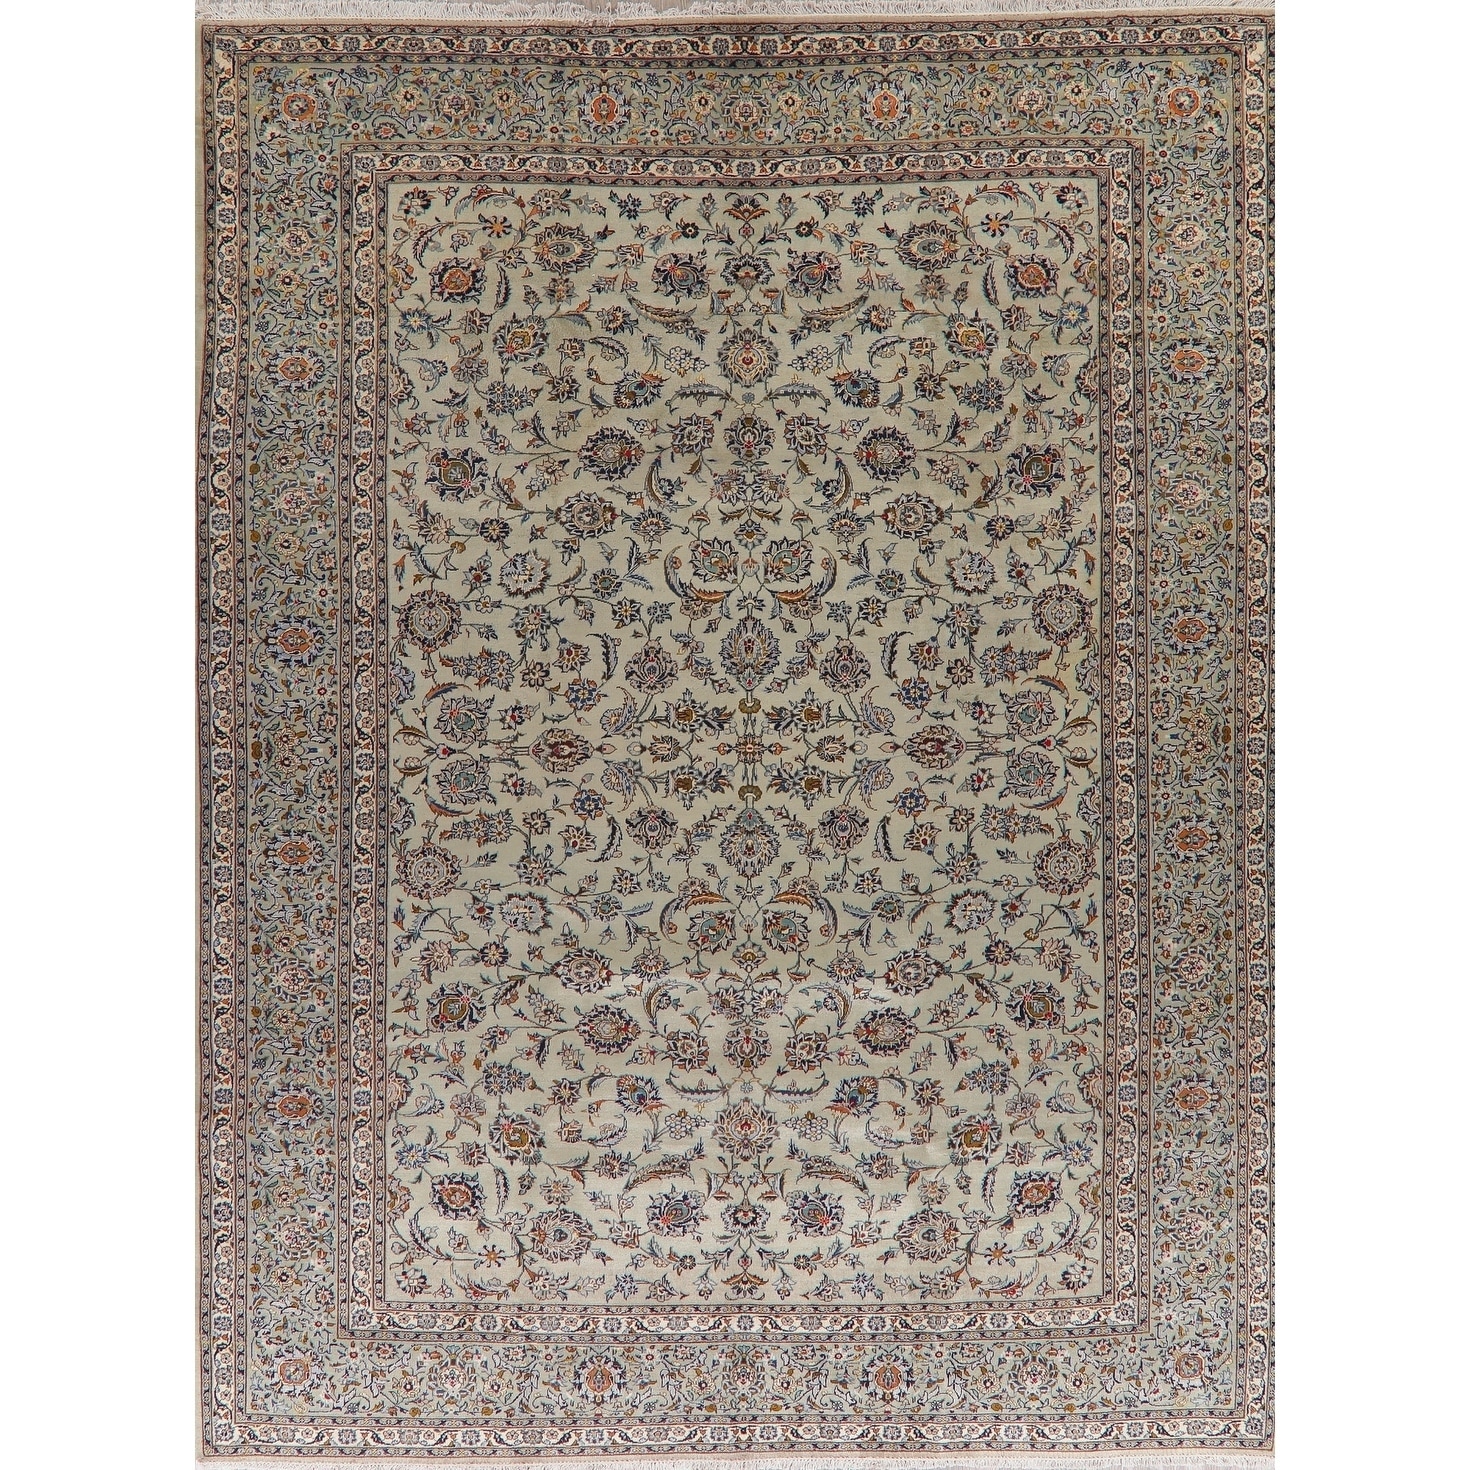 All Over Floral Green Kashan Persian Area Rug Handmade Oriental Carpet 9 8 X 12 11 On Sale Overstock